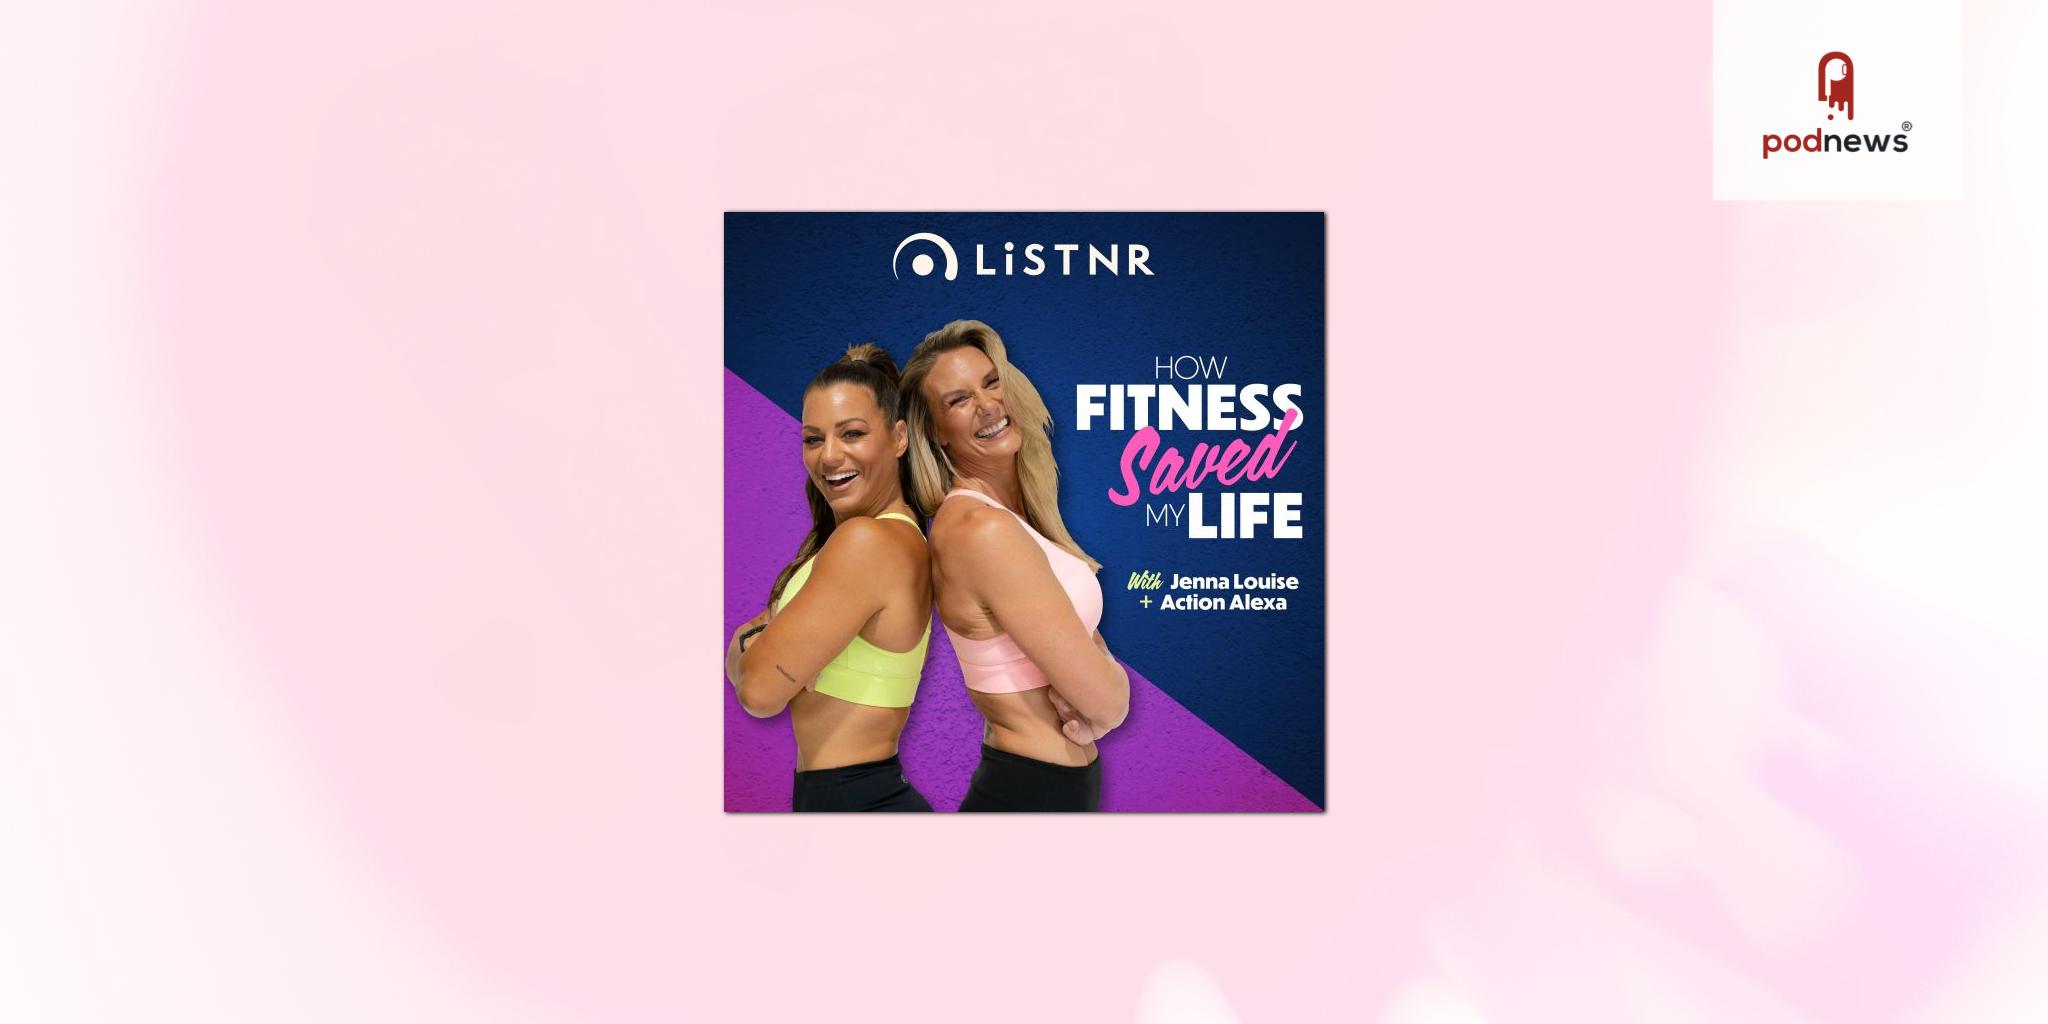 Kick-start your new year goals with the all-new podcast How Fitness Saved My Life on LiSTNR